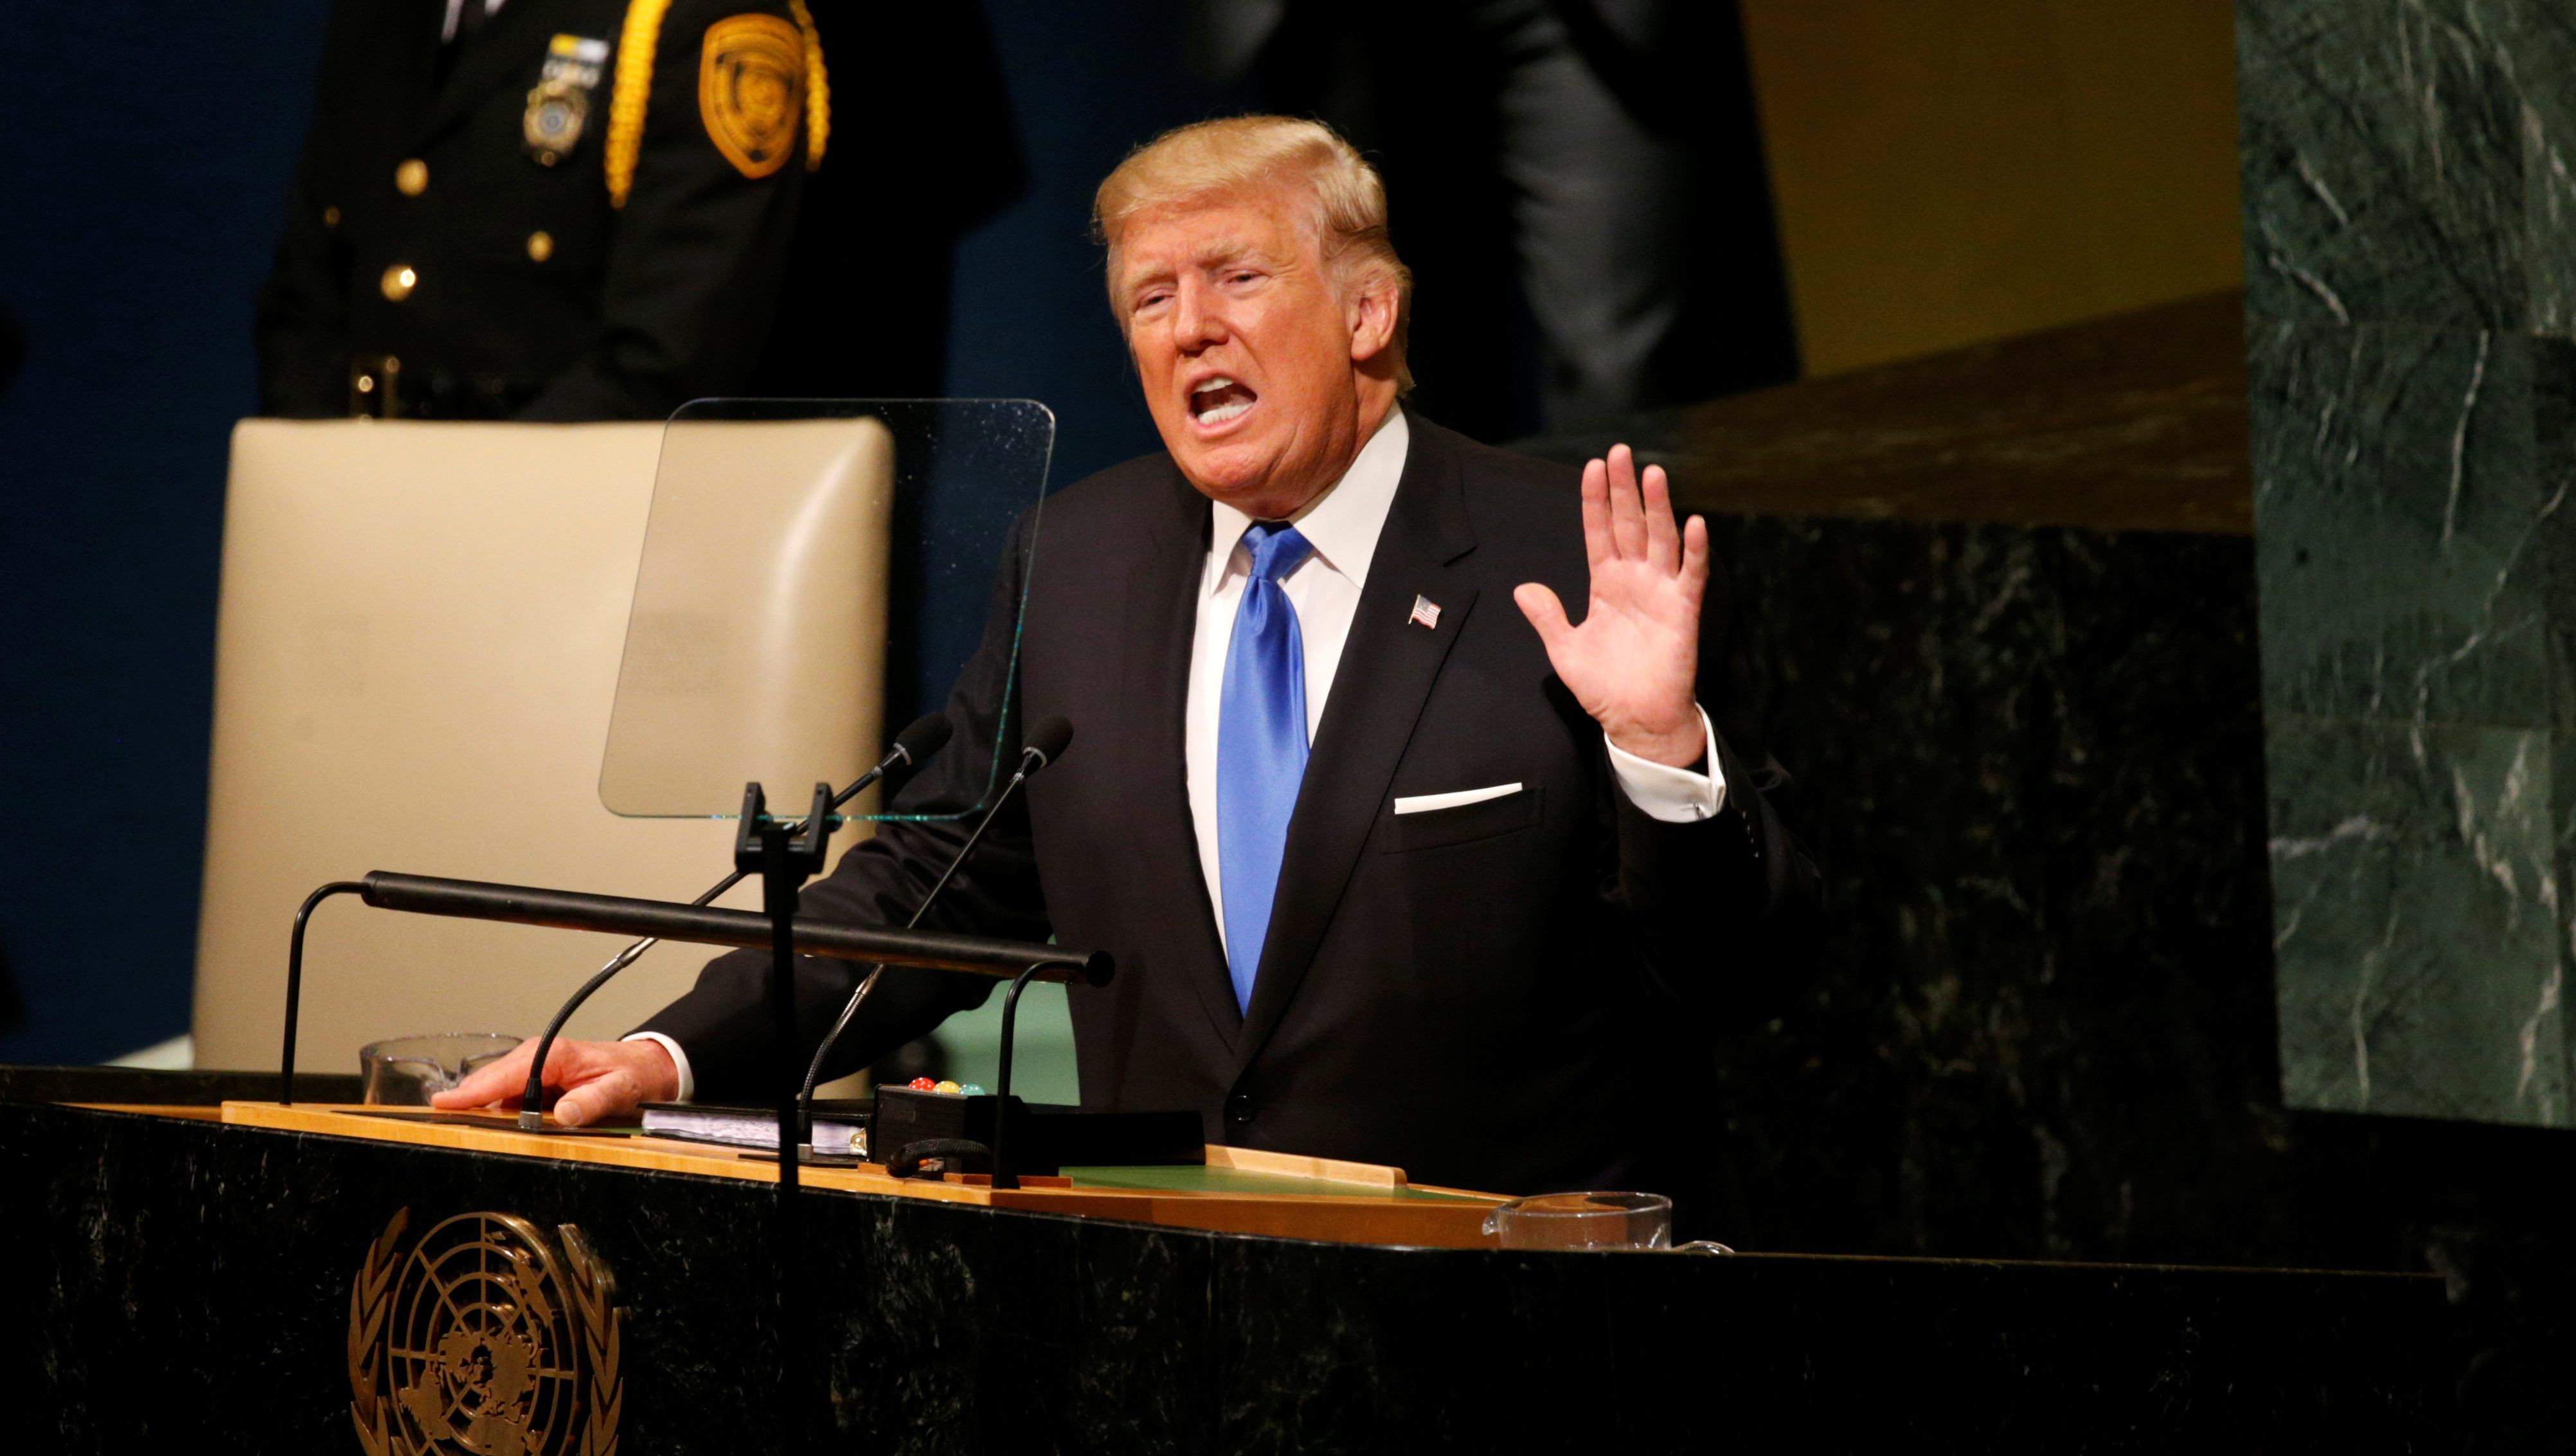 Trump Talks Tough Again, Supports Death Penalty for Terrorists